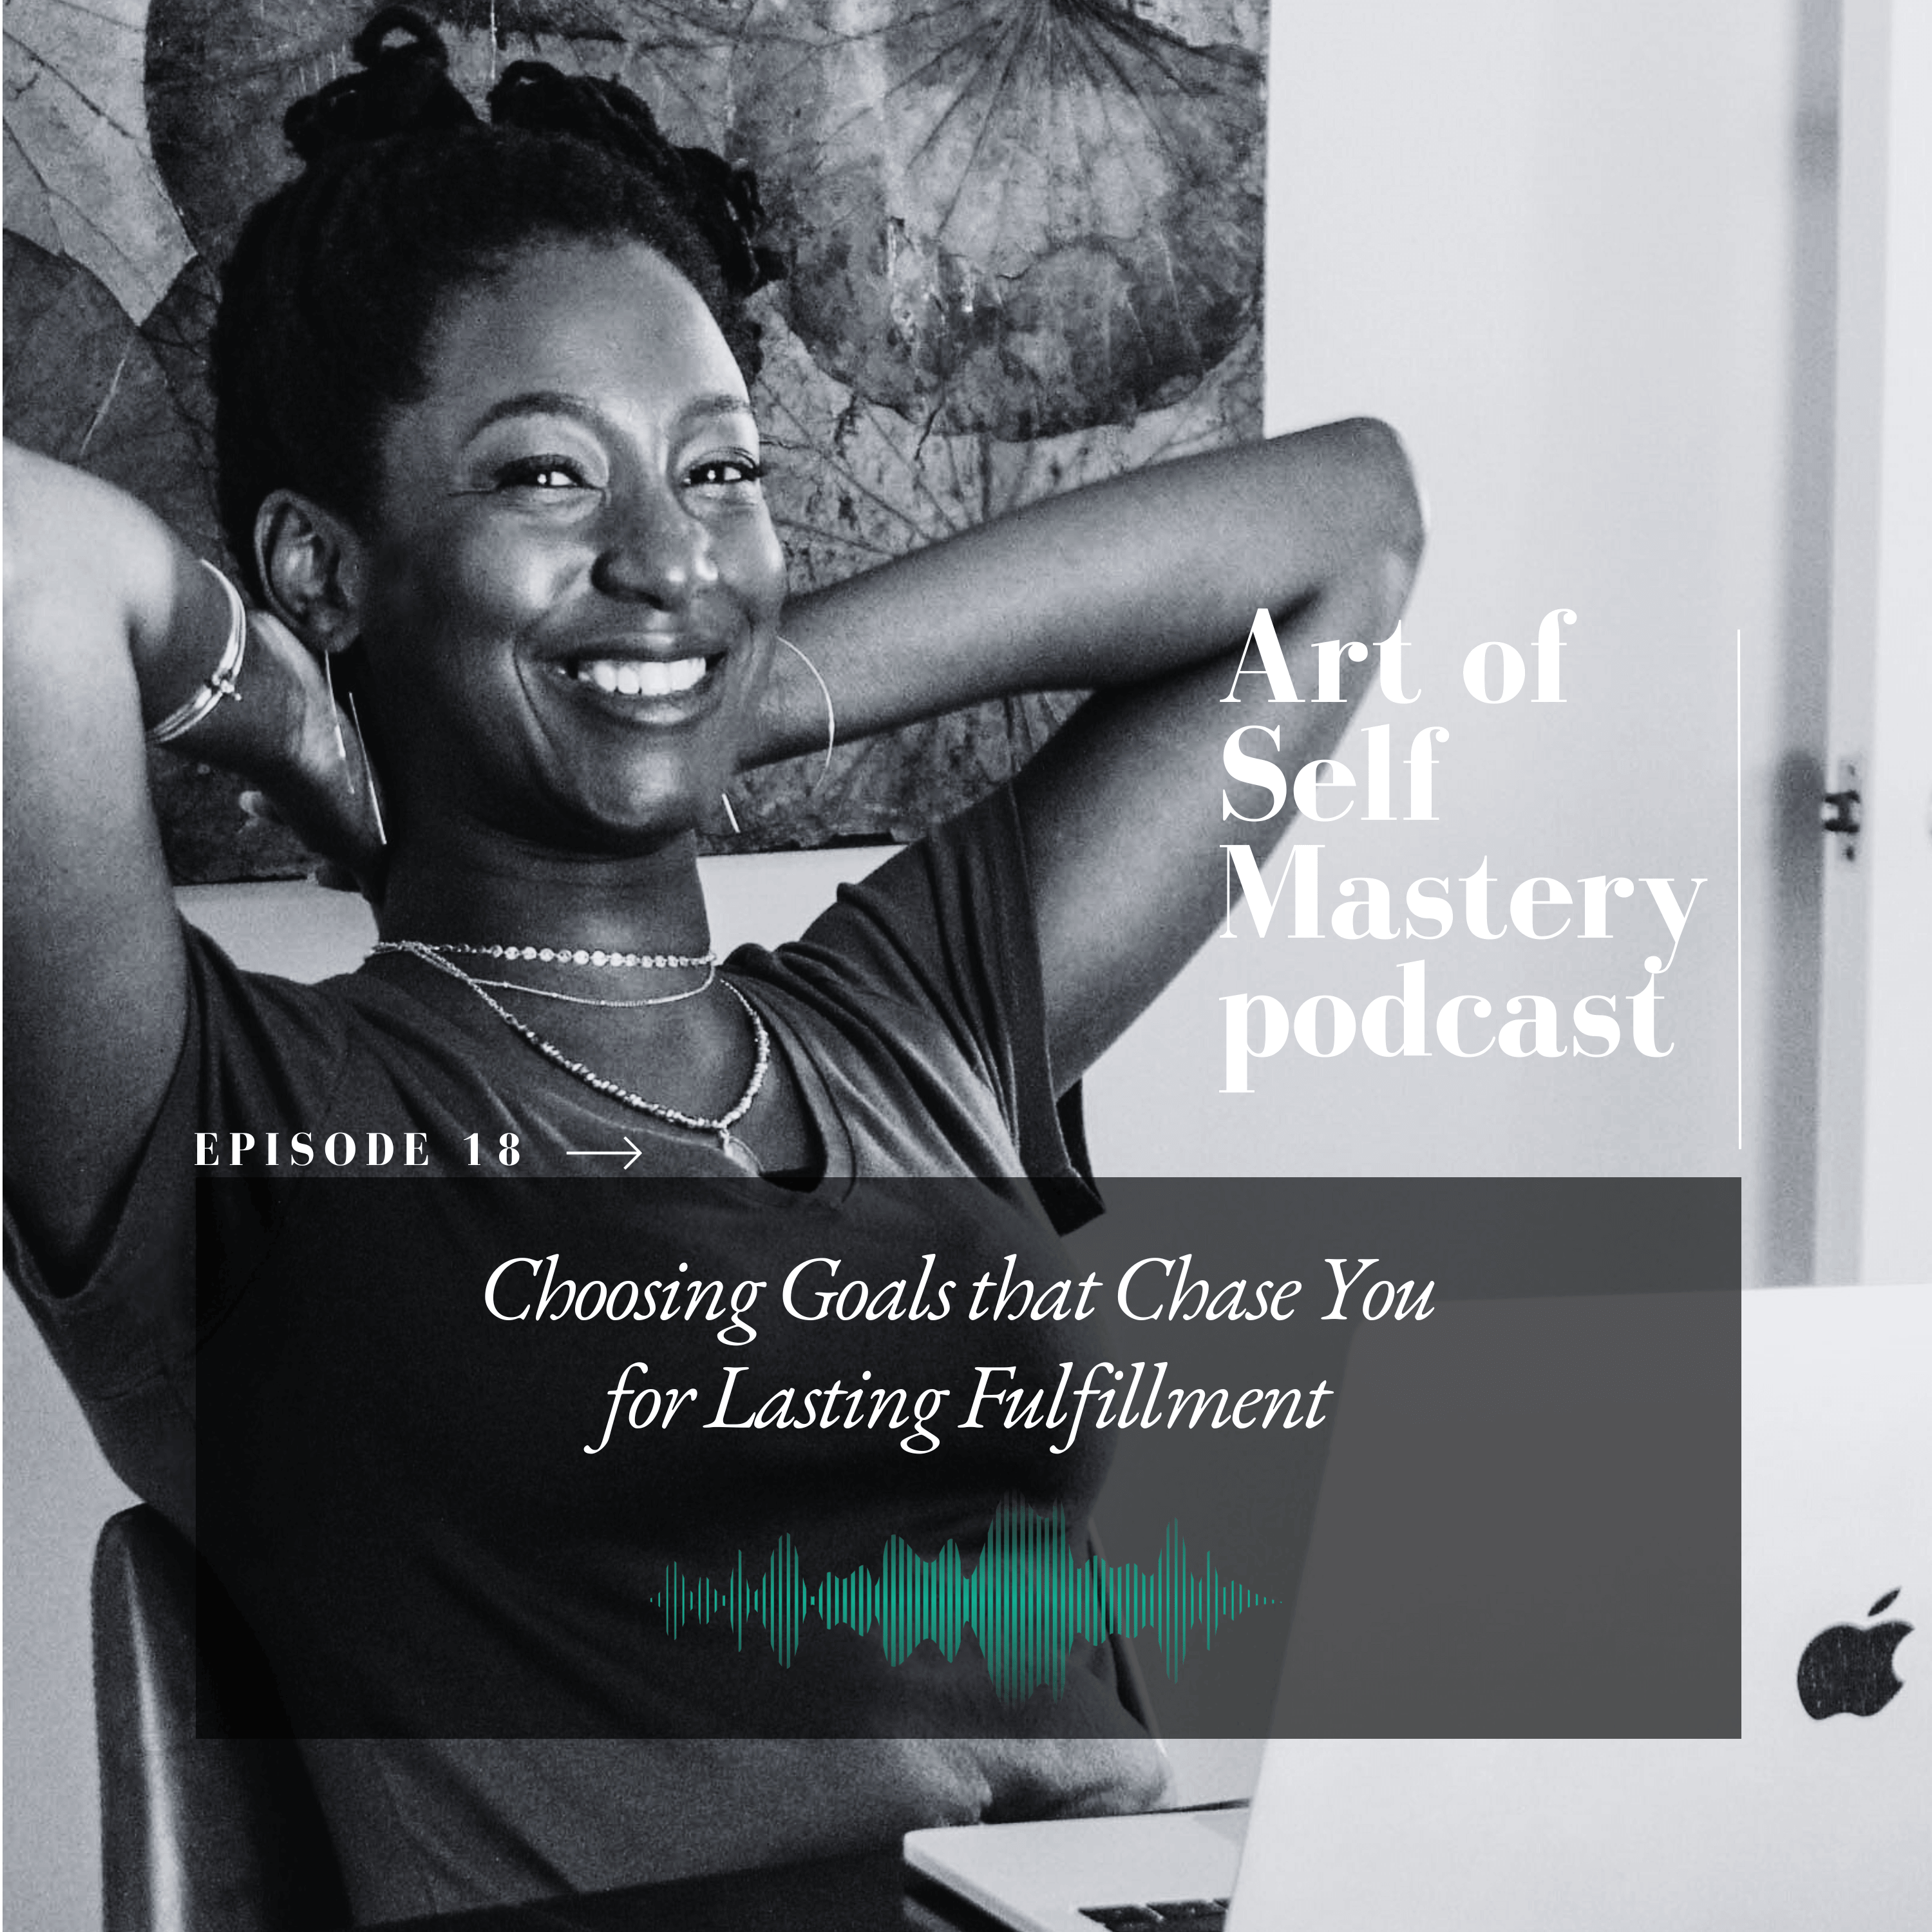 Woman smiling in front of a laptop. Text says: Art of Self Mastery podcast. Episode 18: Choosing Goals that Chase You for Lasting Fulfillment